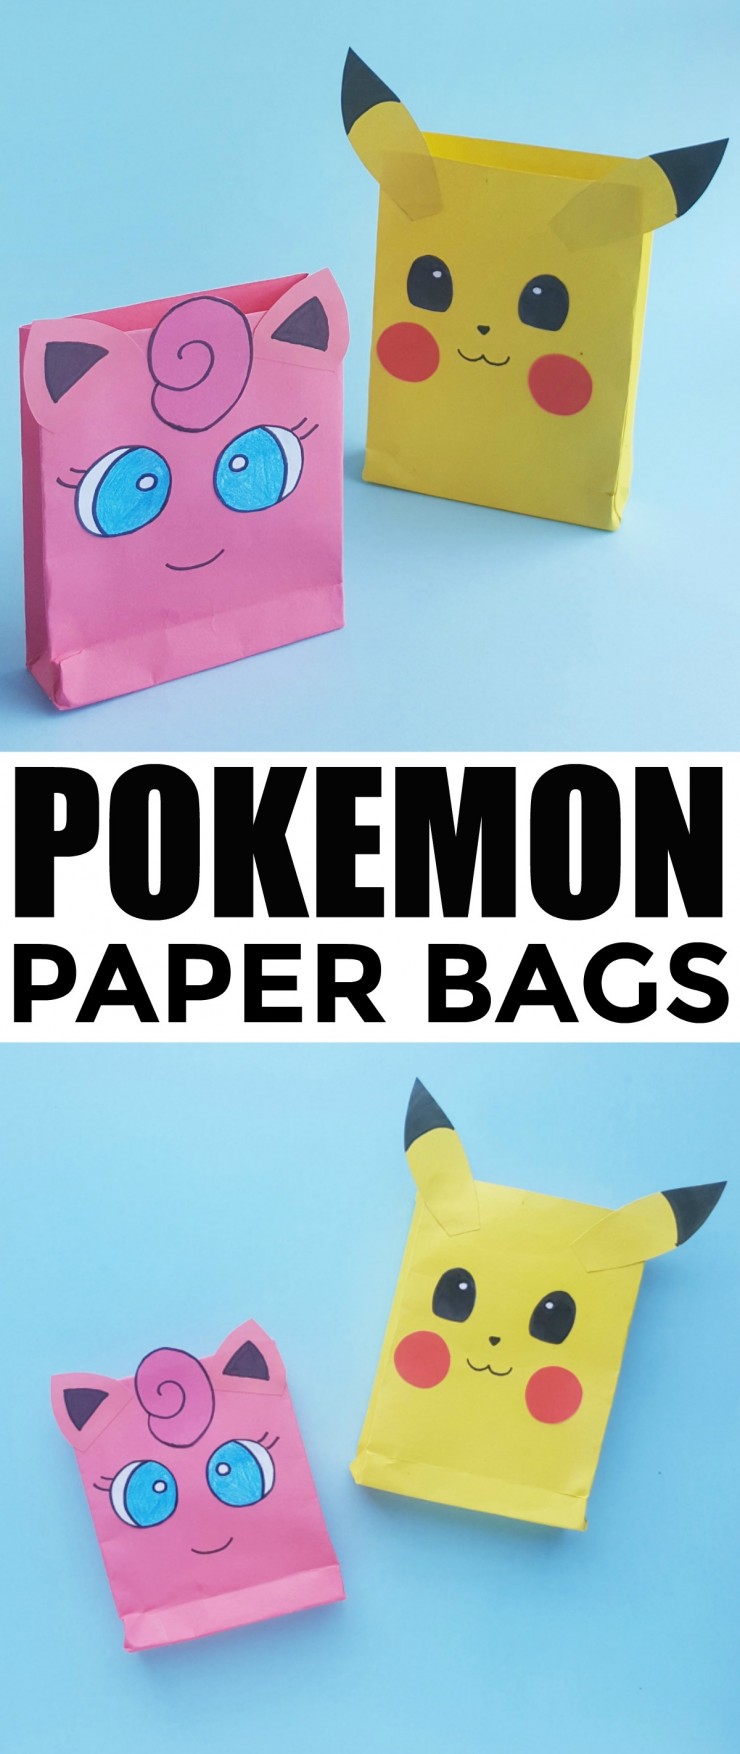 This Pokemon Inspired Kids Craft is a great Pokemon birthday party activity - kids will love making their very own Pokemon paper bags to fill with treats!